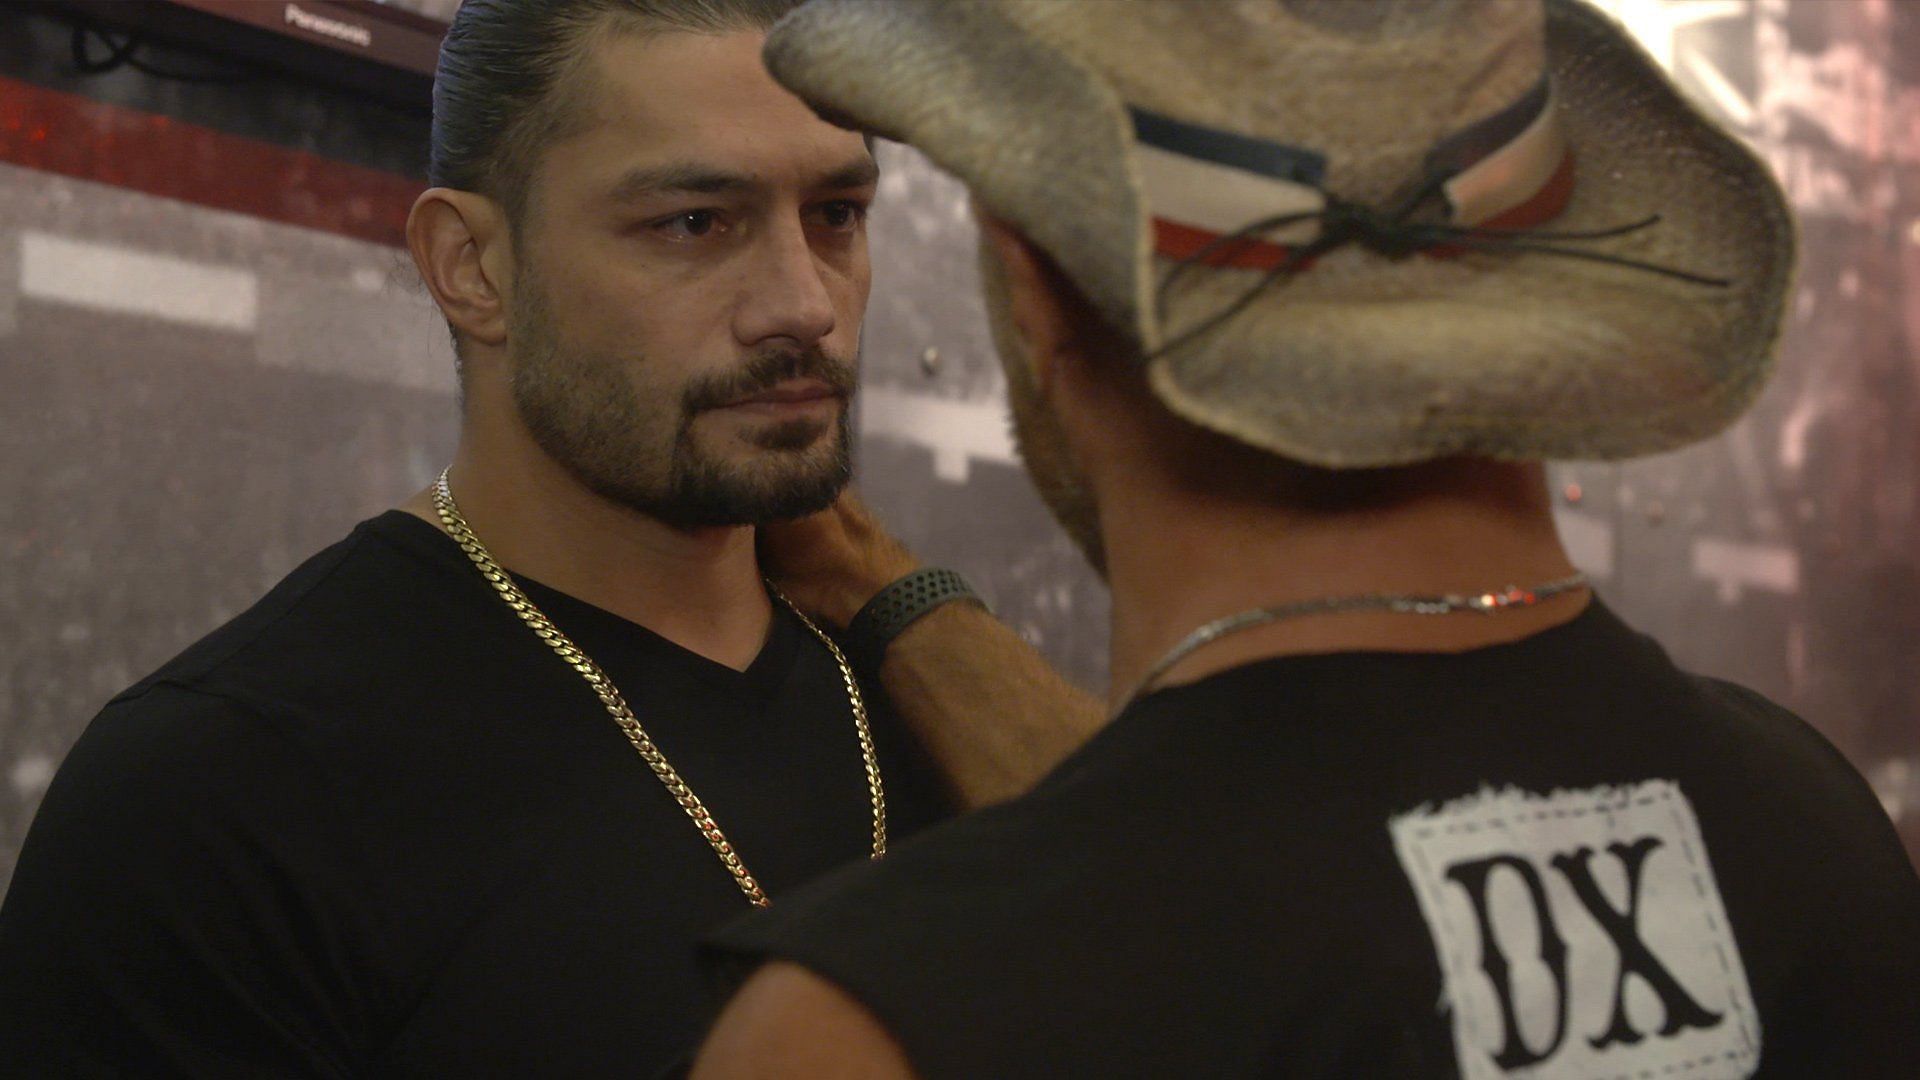 Roman Reigns with Shawn Michaels